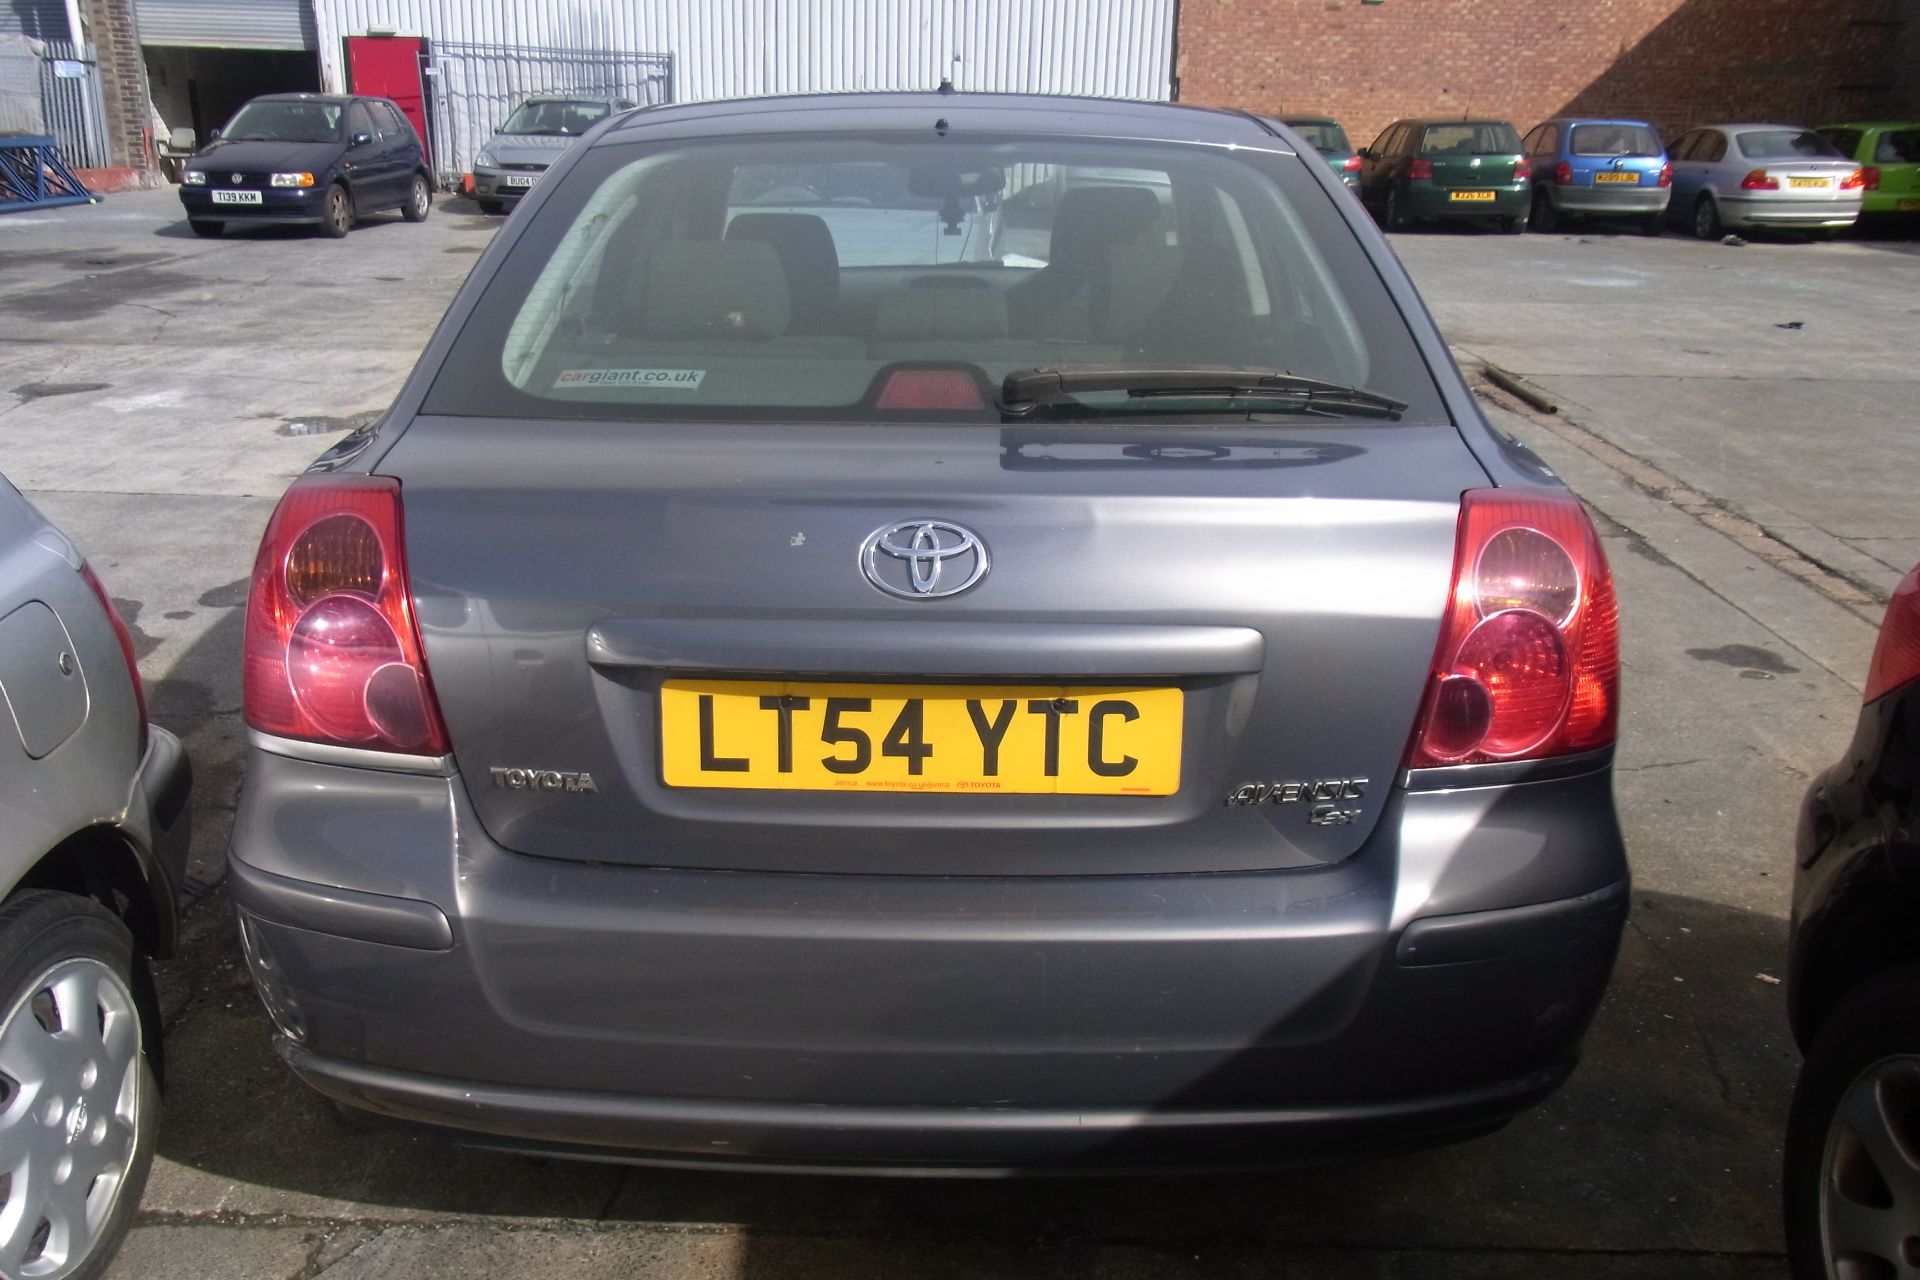 LT54 YTC - Toyota Avensis T3-X - Image 3 of 3